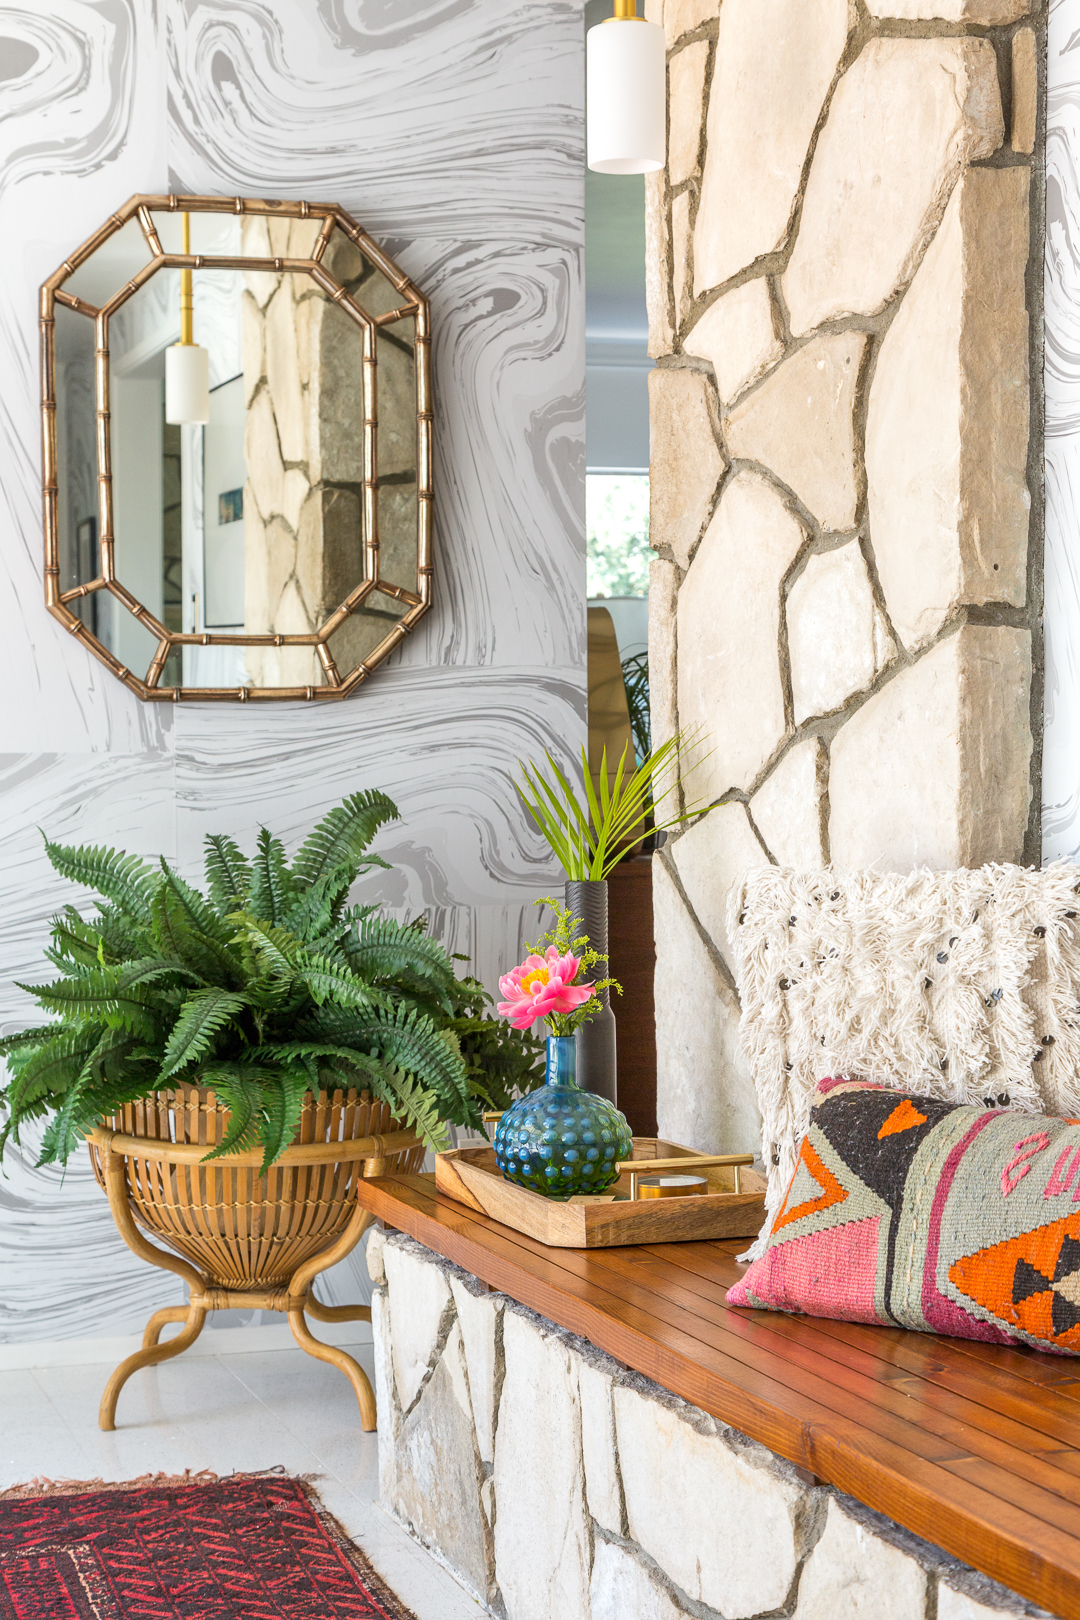 Our Entryway + A Vintage Rug Find - My Kind of Sweet